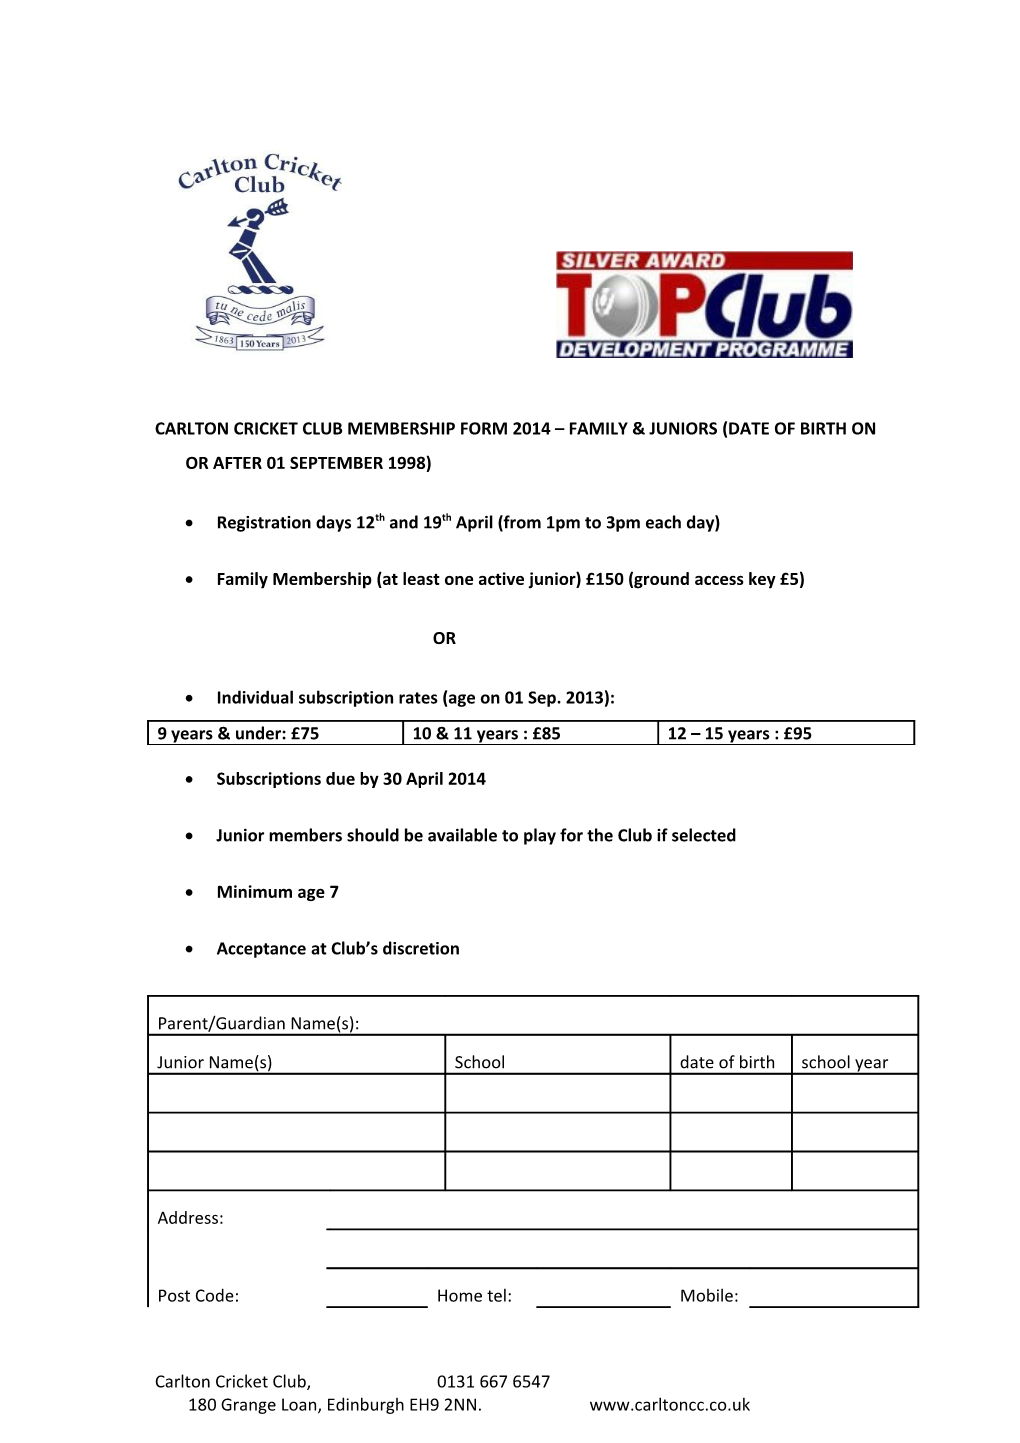 Carlton Cricket Club Membership Form 2014 Family & Juniors (Date of Birth on Or After